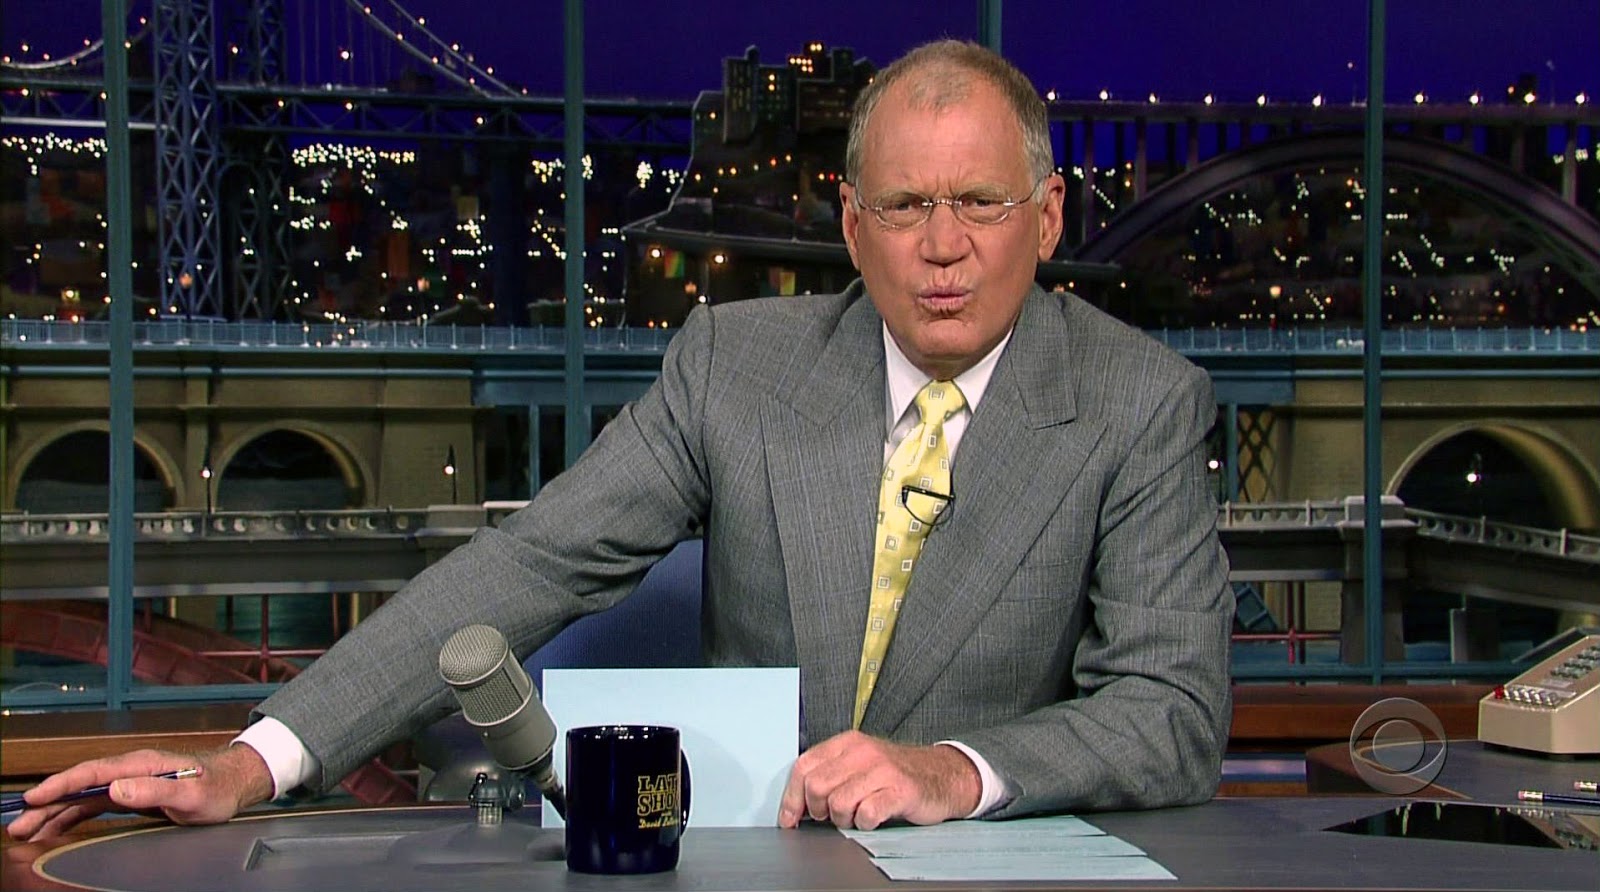 ROTW - Who Should Replace David Letterman?